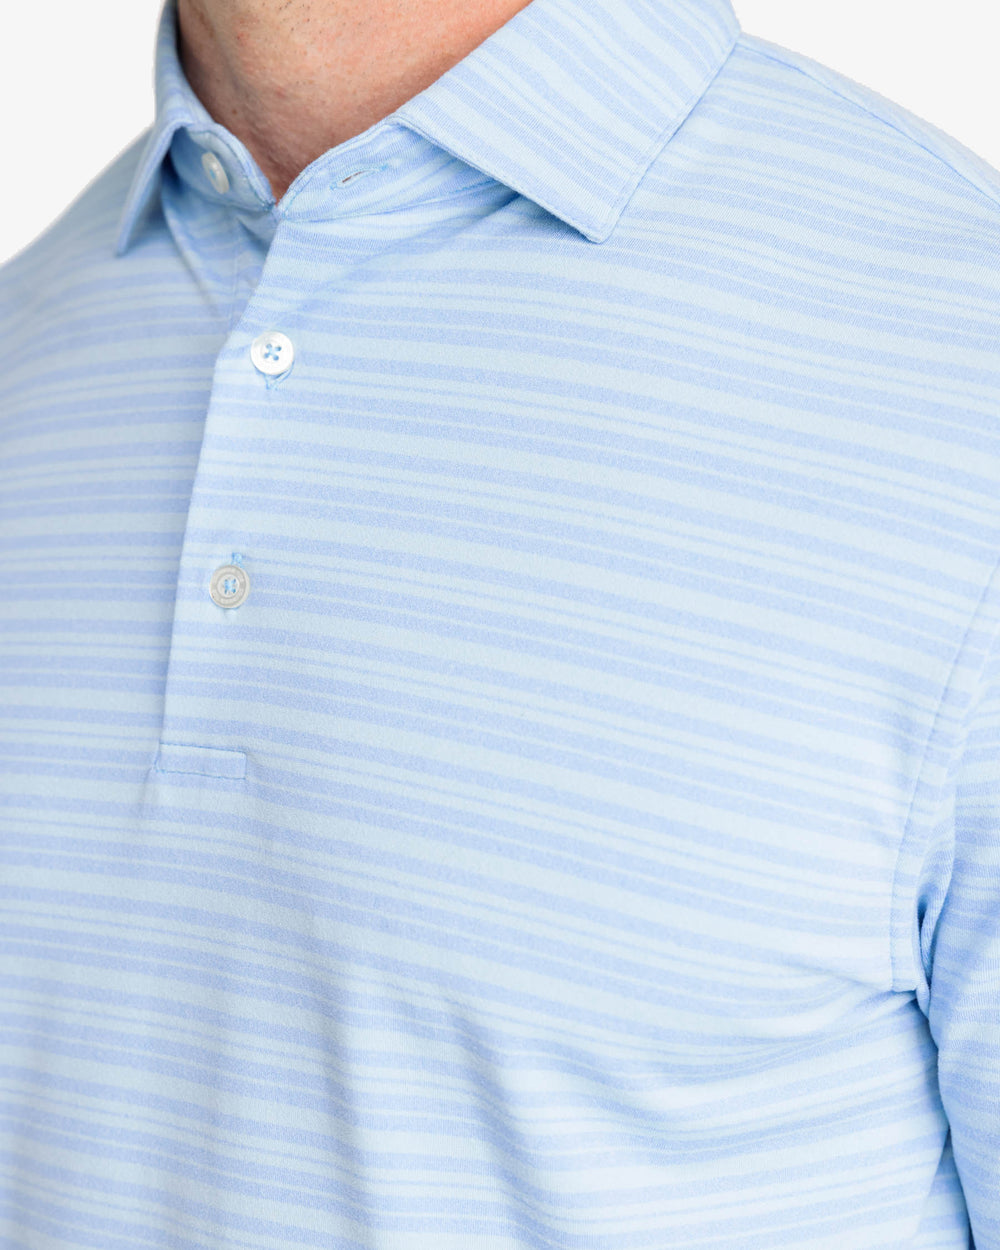 The detail view of the Southern Tide Ryder Heather Bombay Striped Polo Shirt by Southern Tide - Heather Boat Blue